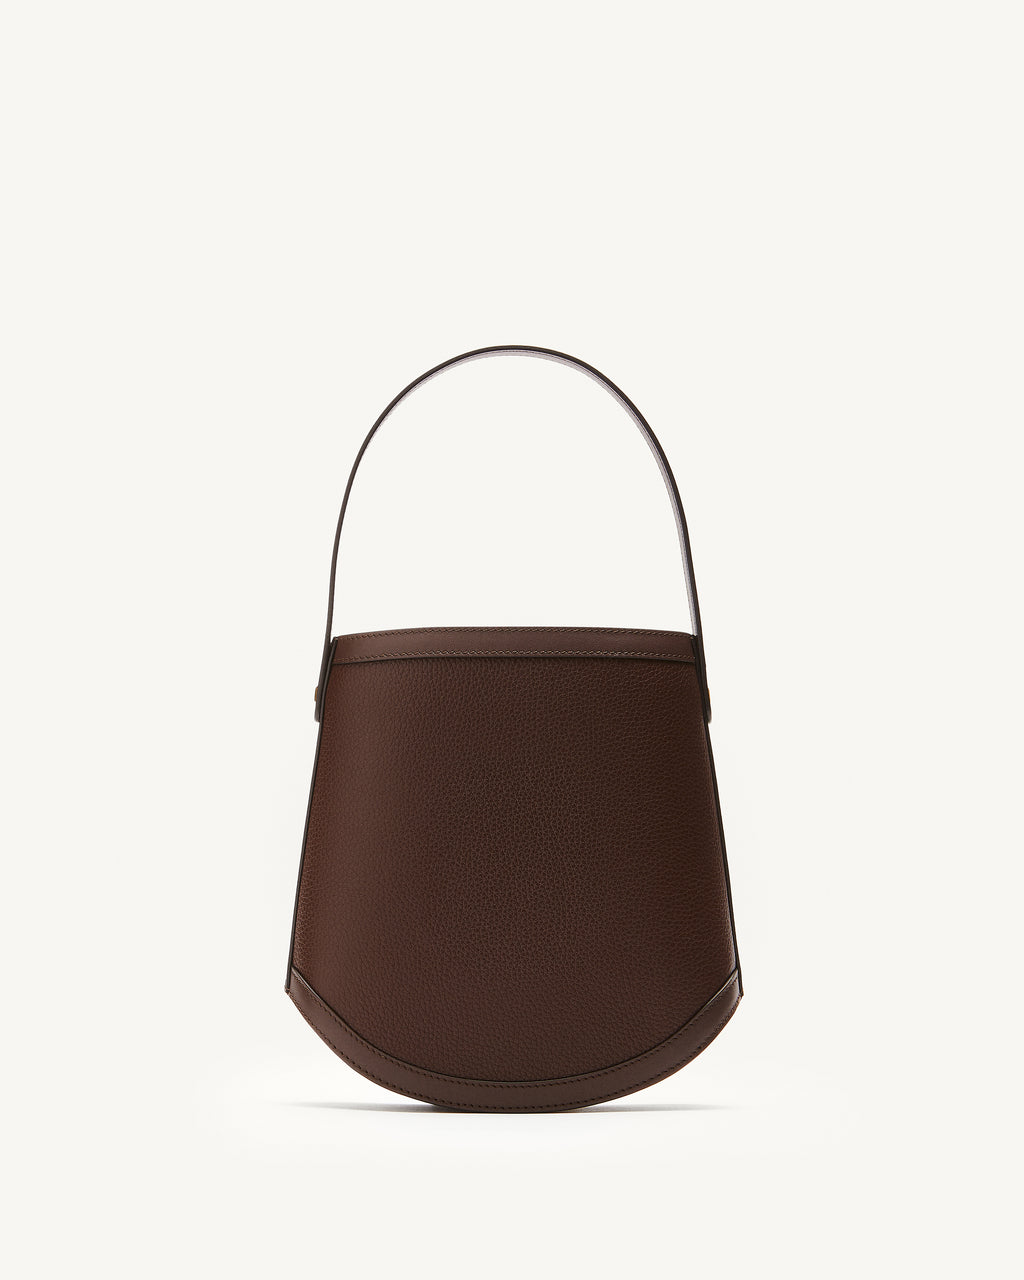 Bucket in Coffee Mixed Leathers